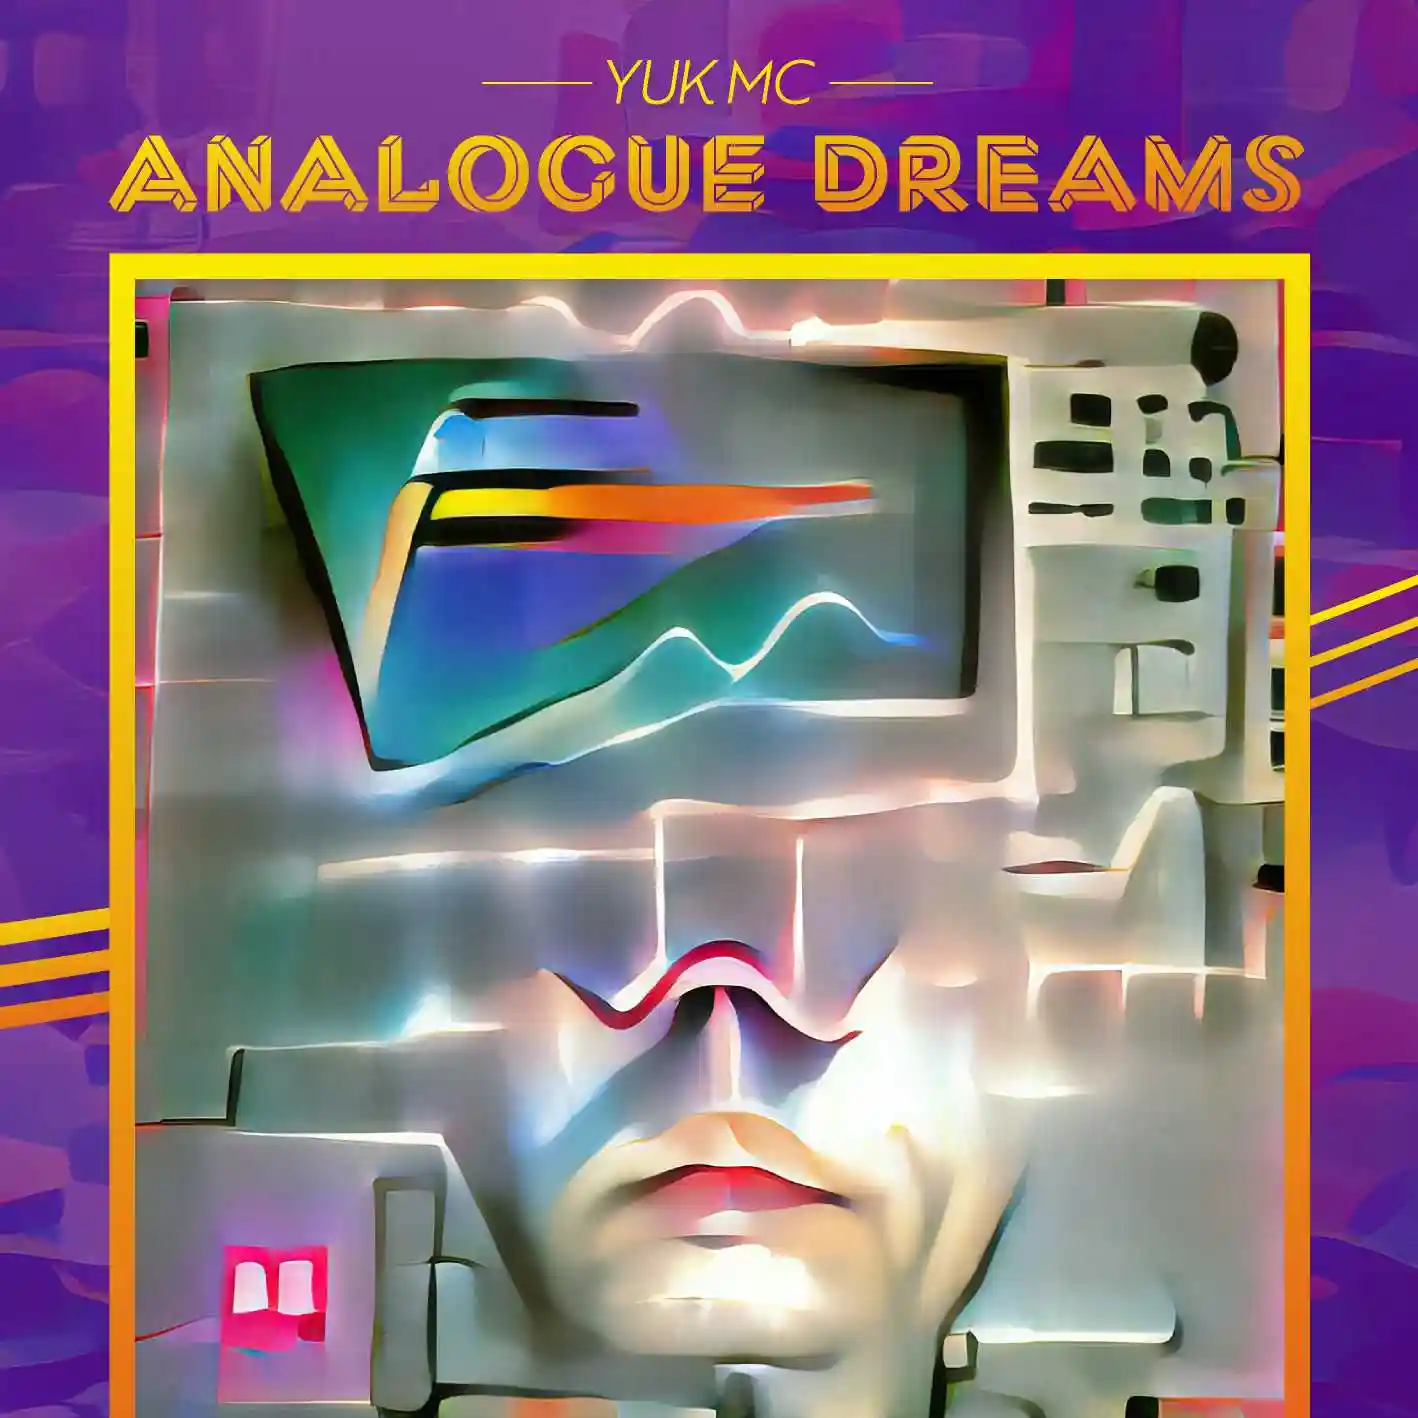 Album cover for “Analogue Dreams” by Yuk MC